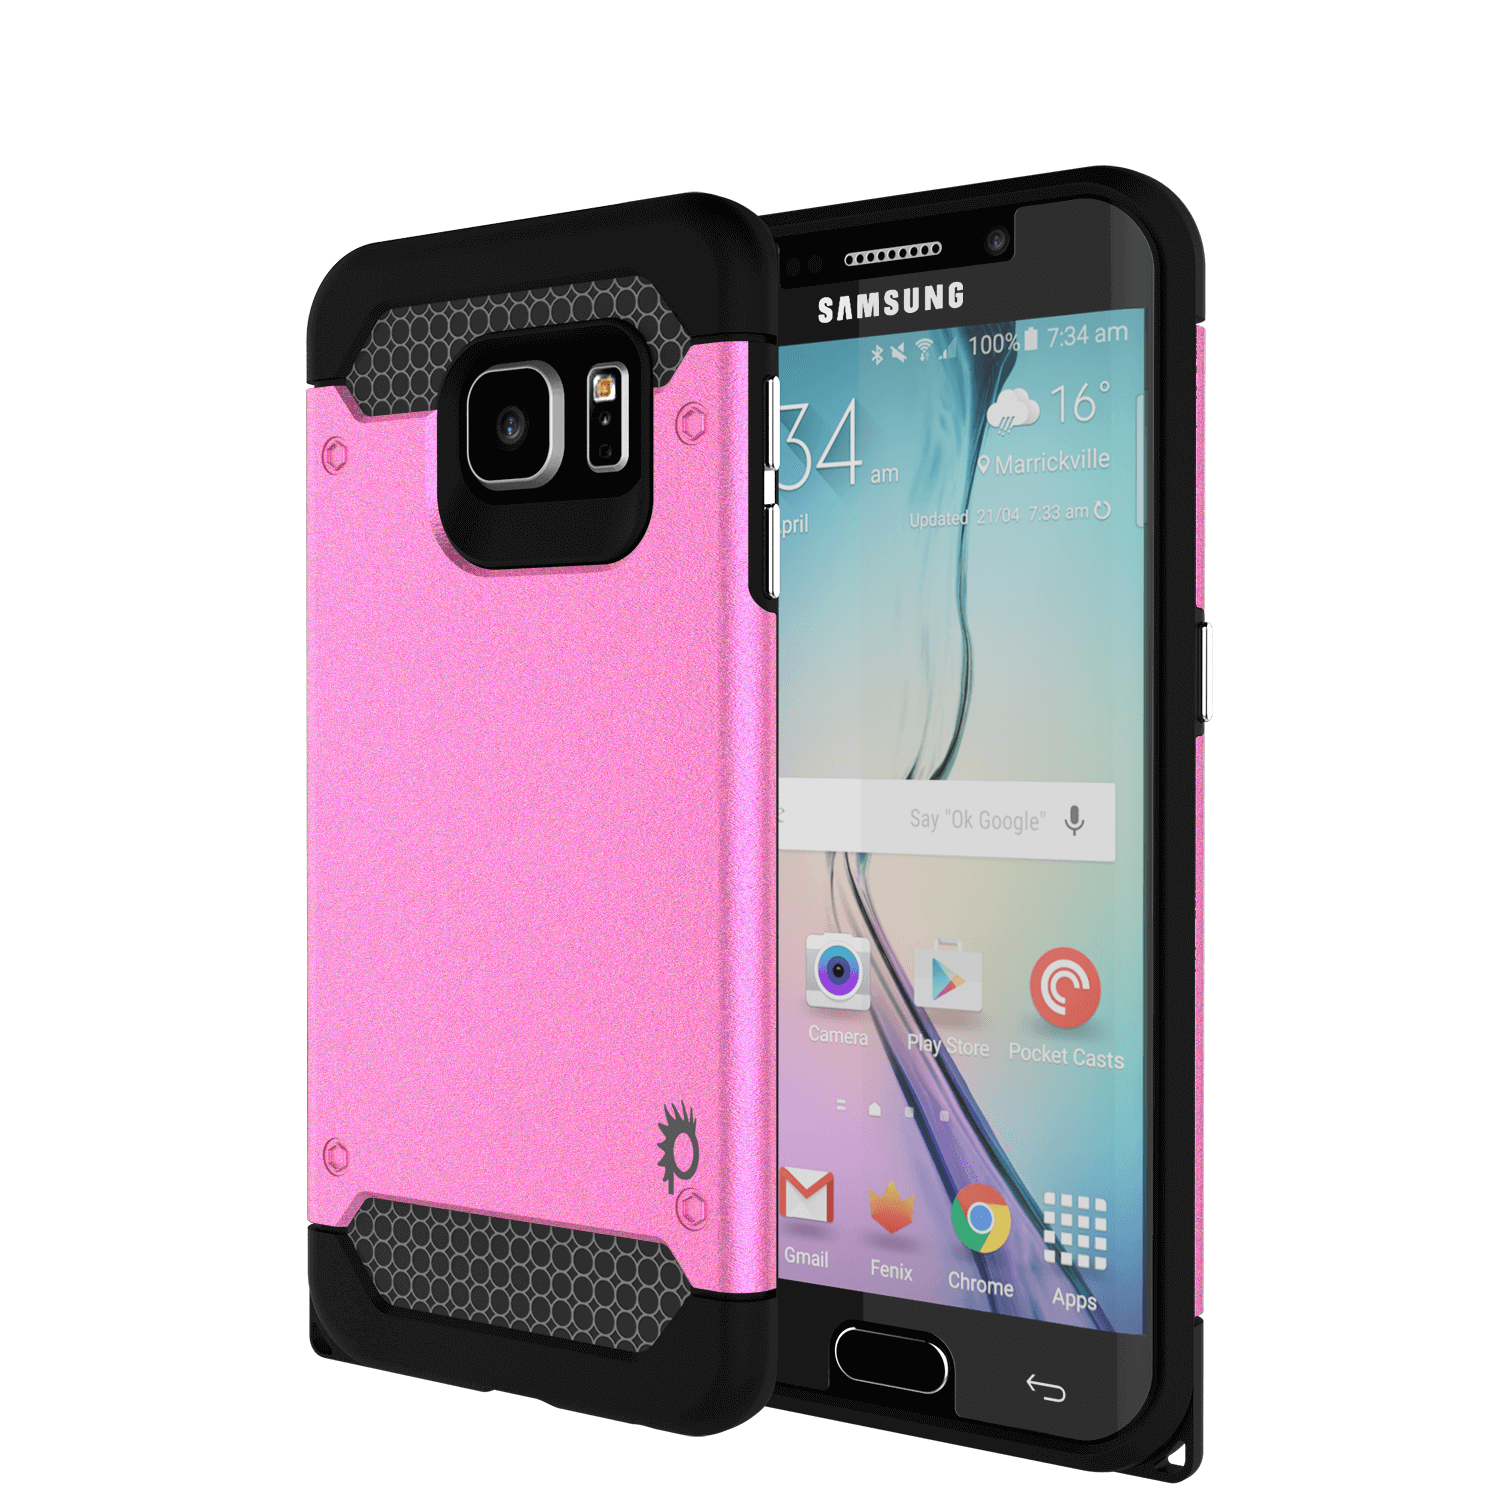 Galaxy s6 EDGE Plus Case PunkCase Galactic Pink Series Slim Protective Armor Soft Cover Case w/ Tempered Glass Protector Lifetime Warranty (Color in image: pink)